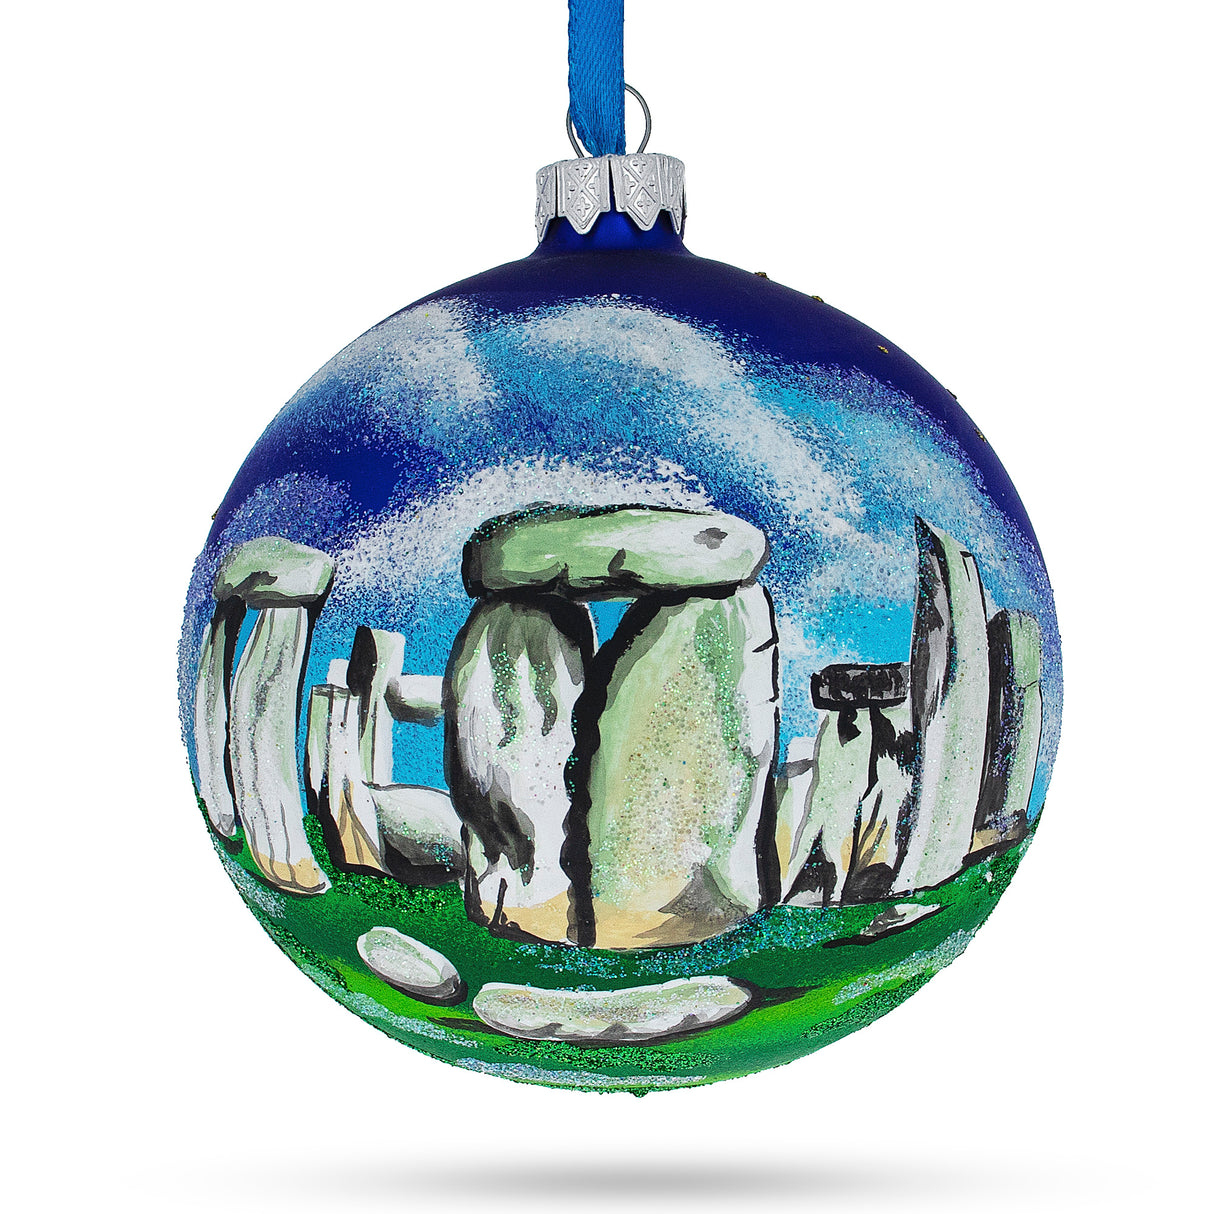 Stonehenge, England, Great Britain Glass Ball Christmas Ornament 4 Inches in Multi color, Round shape